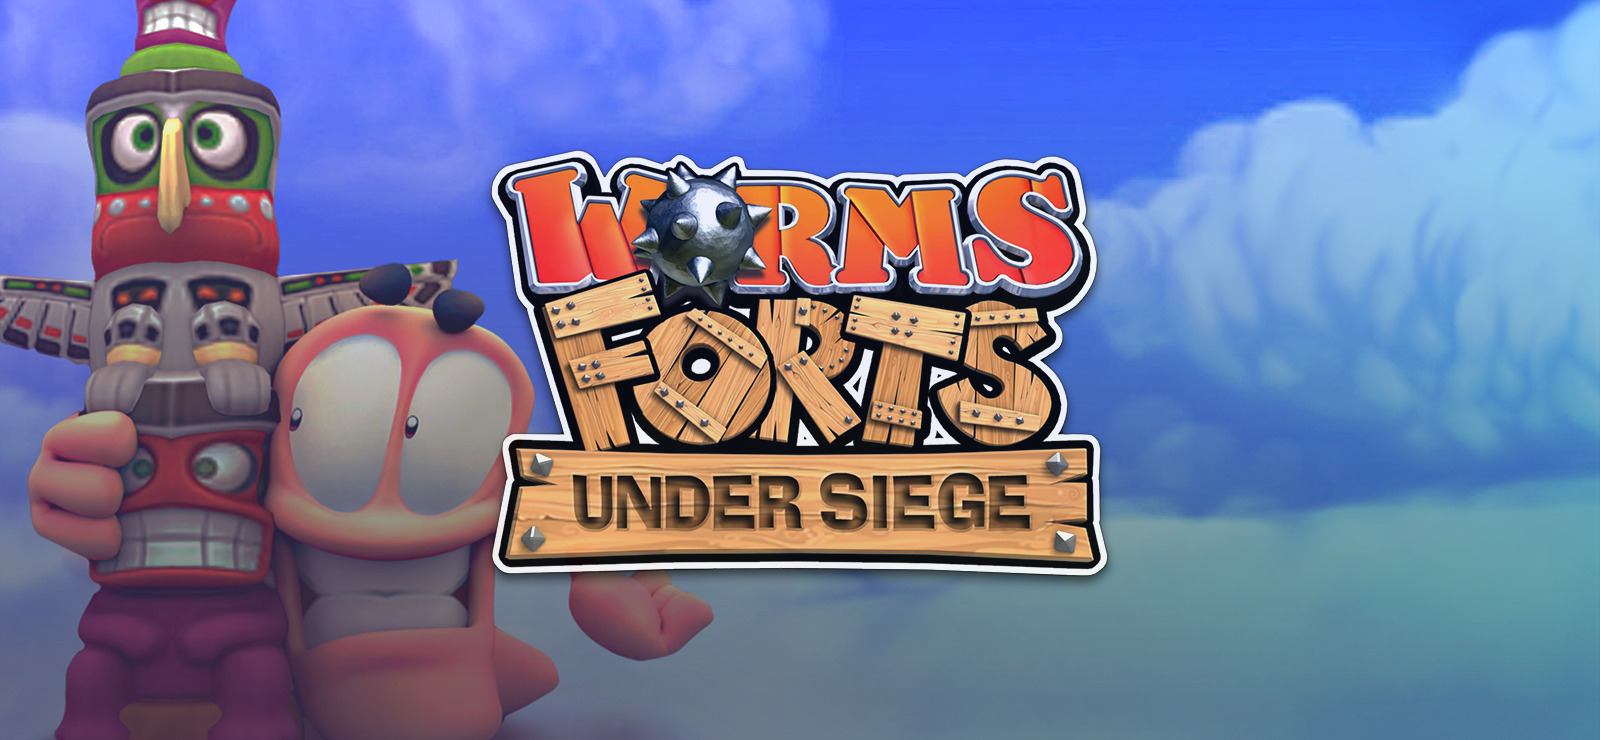 Worms forts. Worms игра. Вормс Форт. Worms Forts: в осаде. Вормс башни.